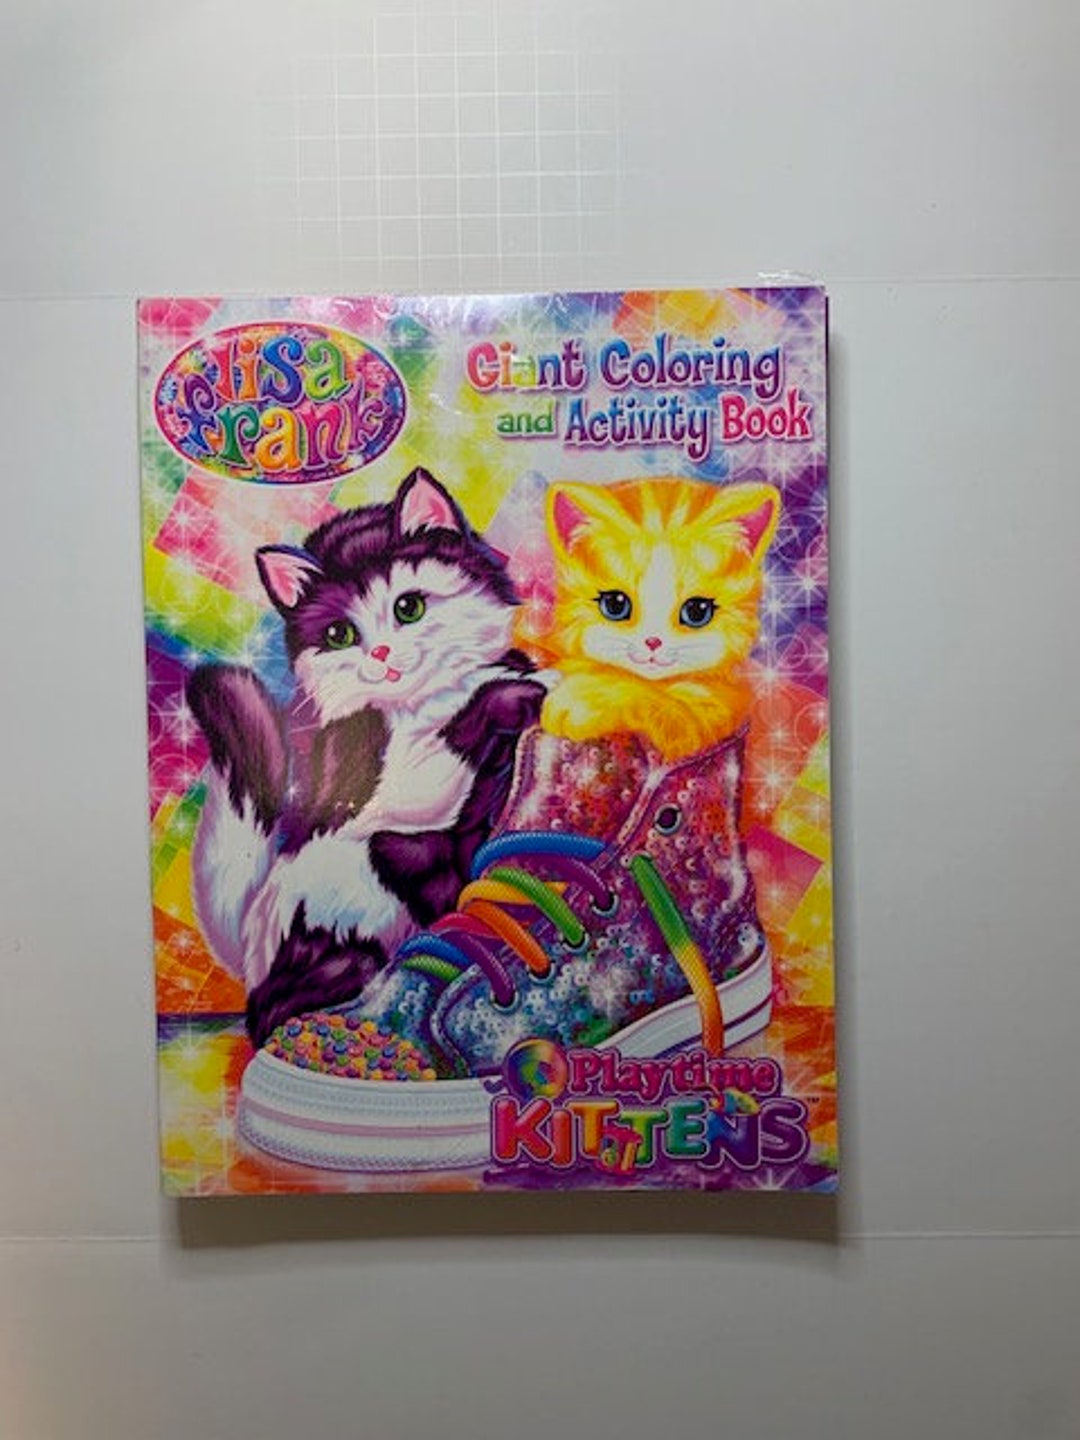 Buy Lisa Frank Paper Dolls Activity Set -- 1 Wooden Doll with